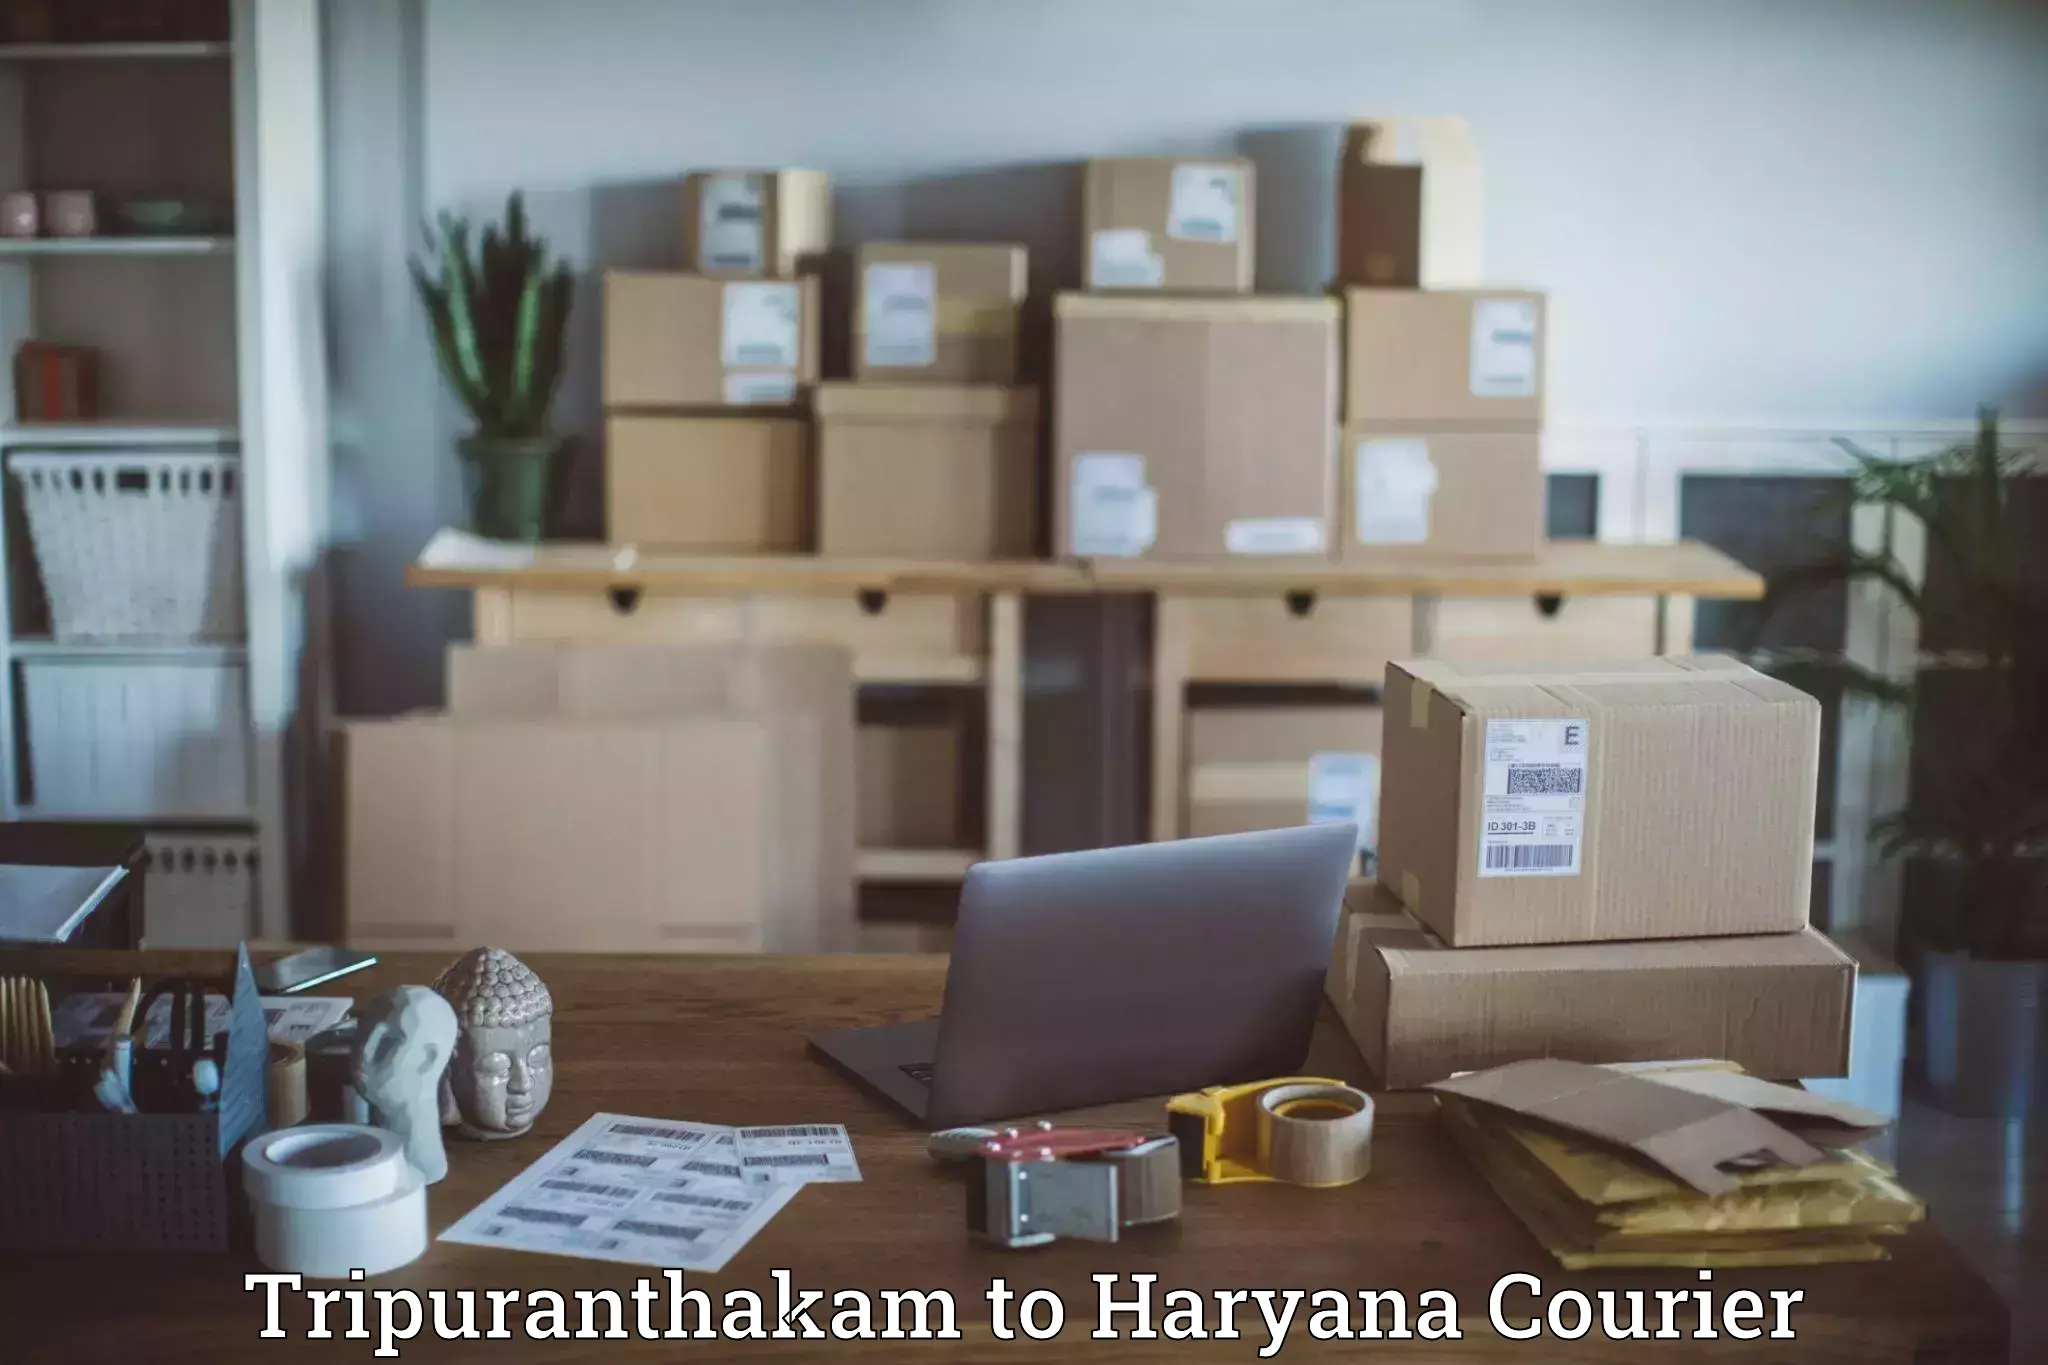 Courier service partnerships Tripuranthakam to Pinjore